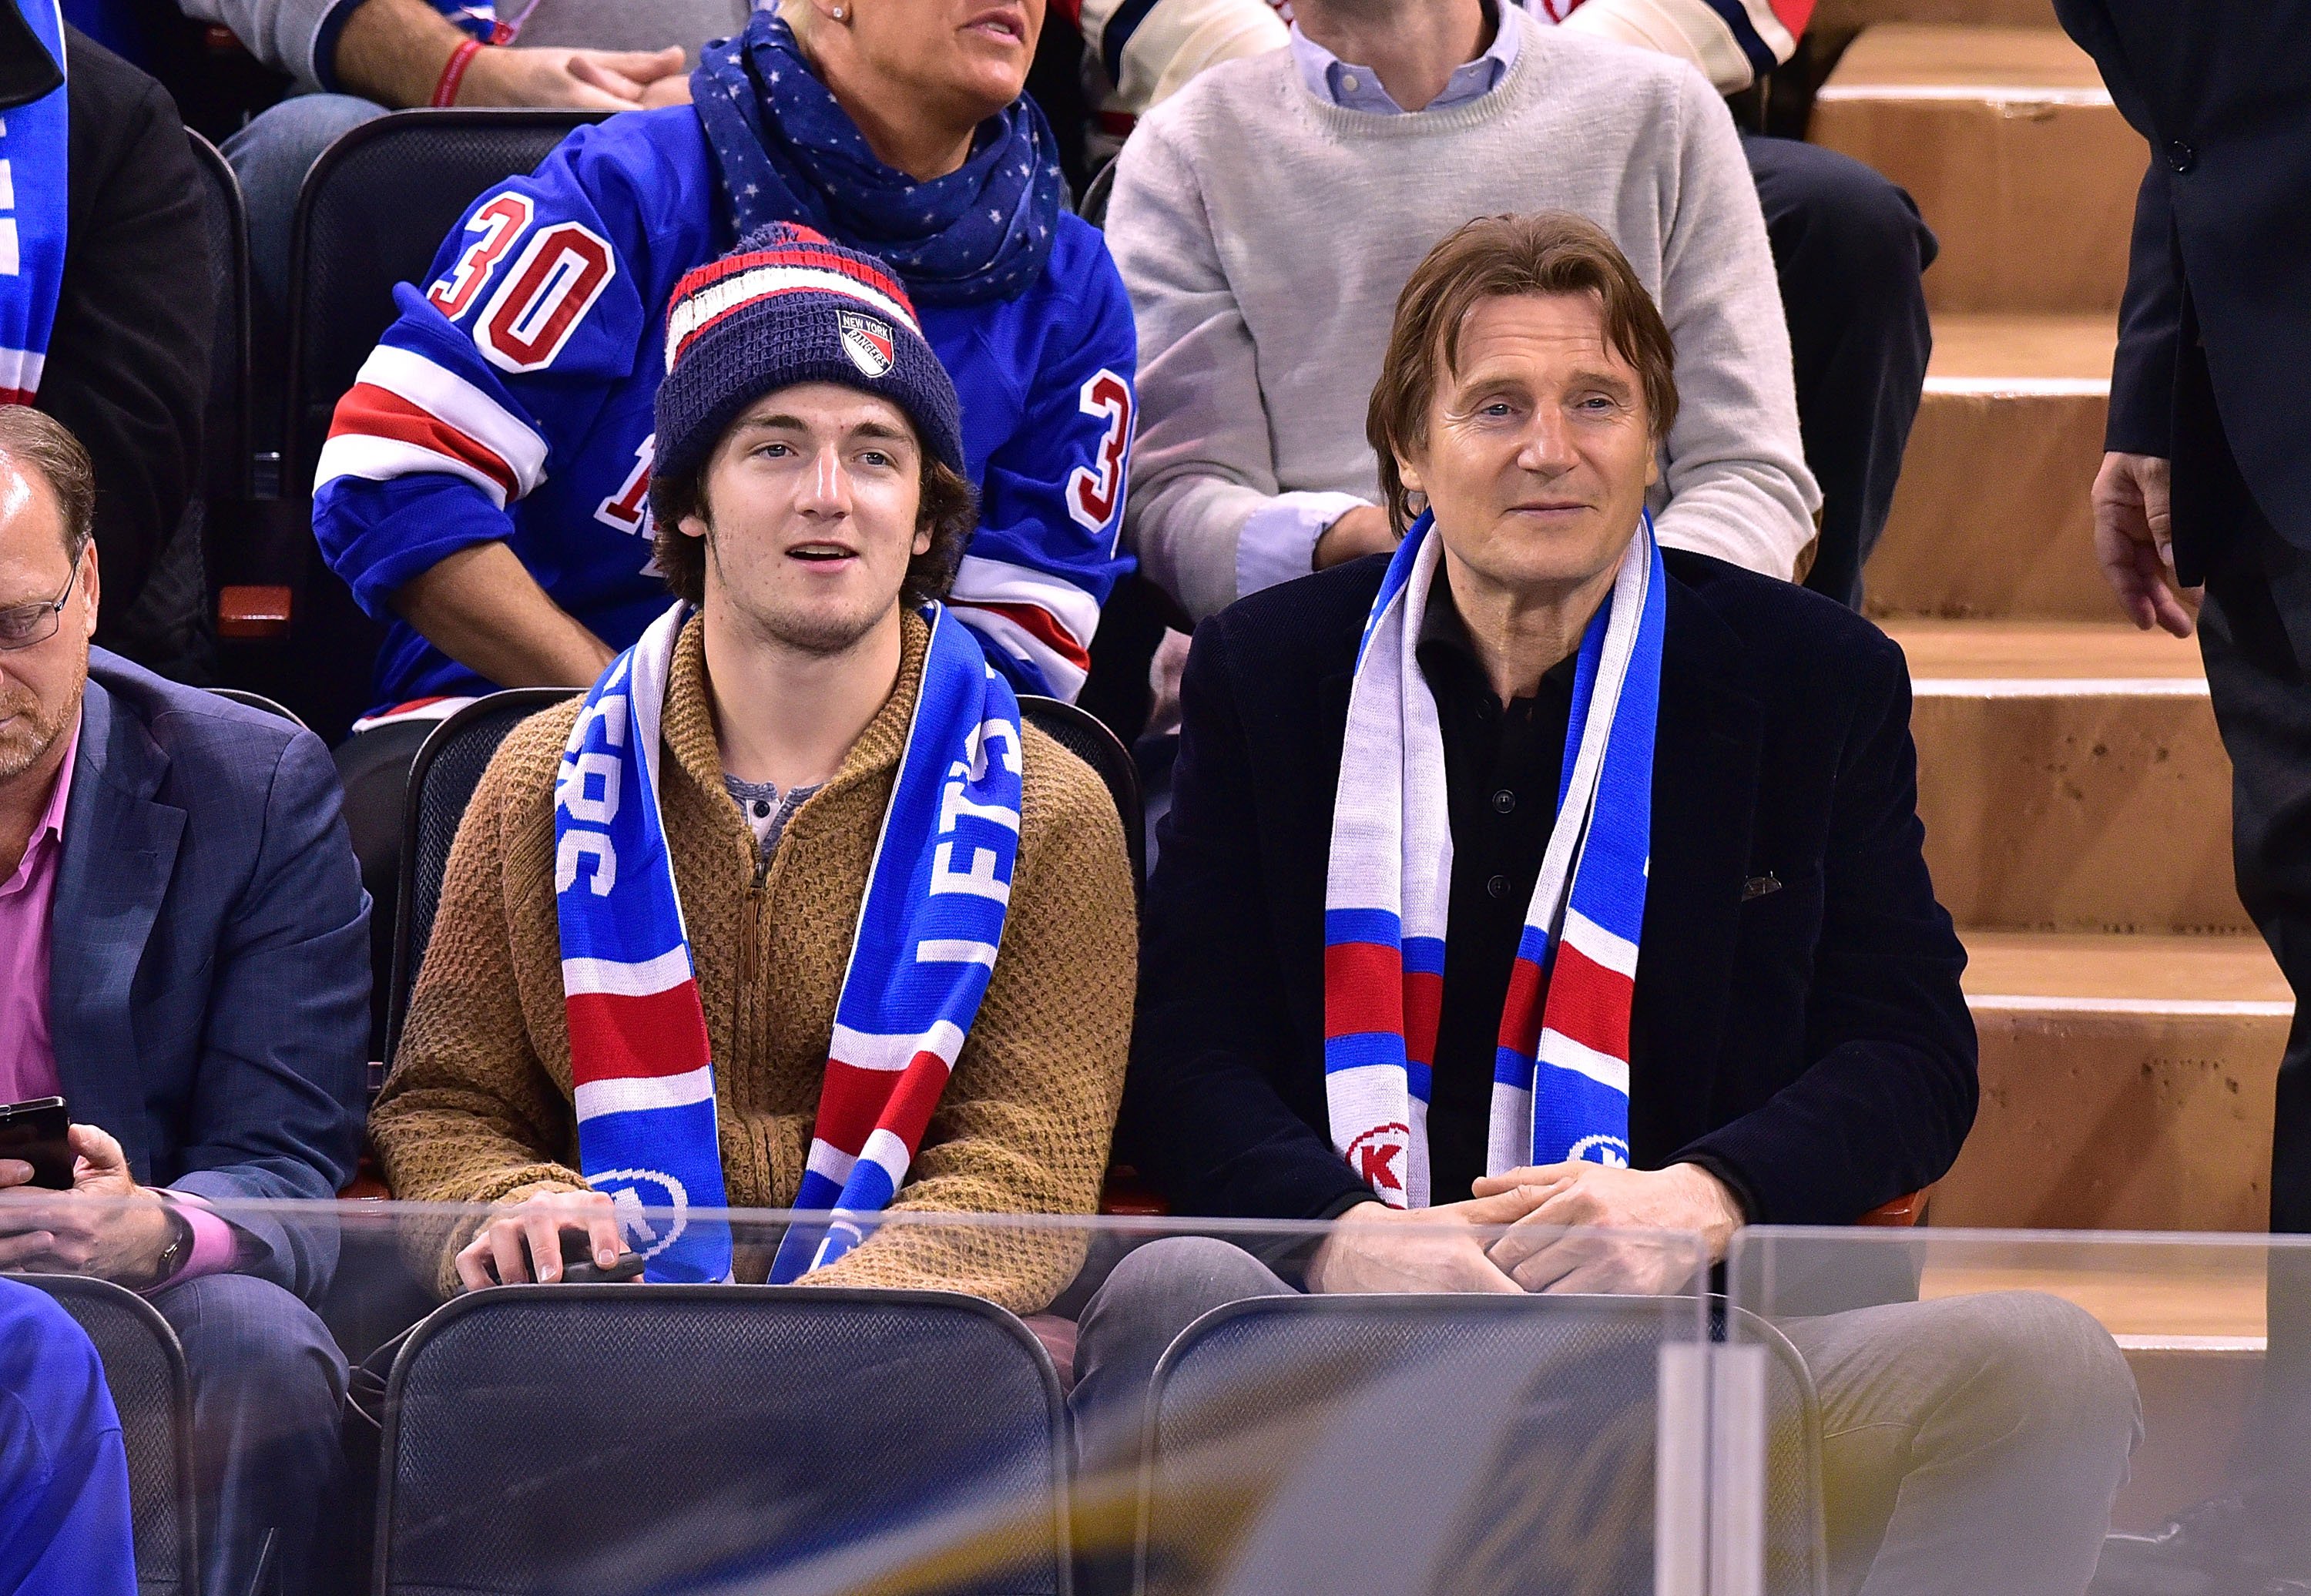 Daniel Neeson and Liam Neeson attend Ottawa Senators vs. New York Rangers game at Madison Square Garden on January 20, 2015, in New York City. | Source: Getty Images